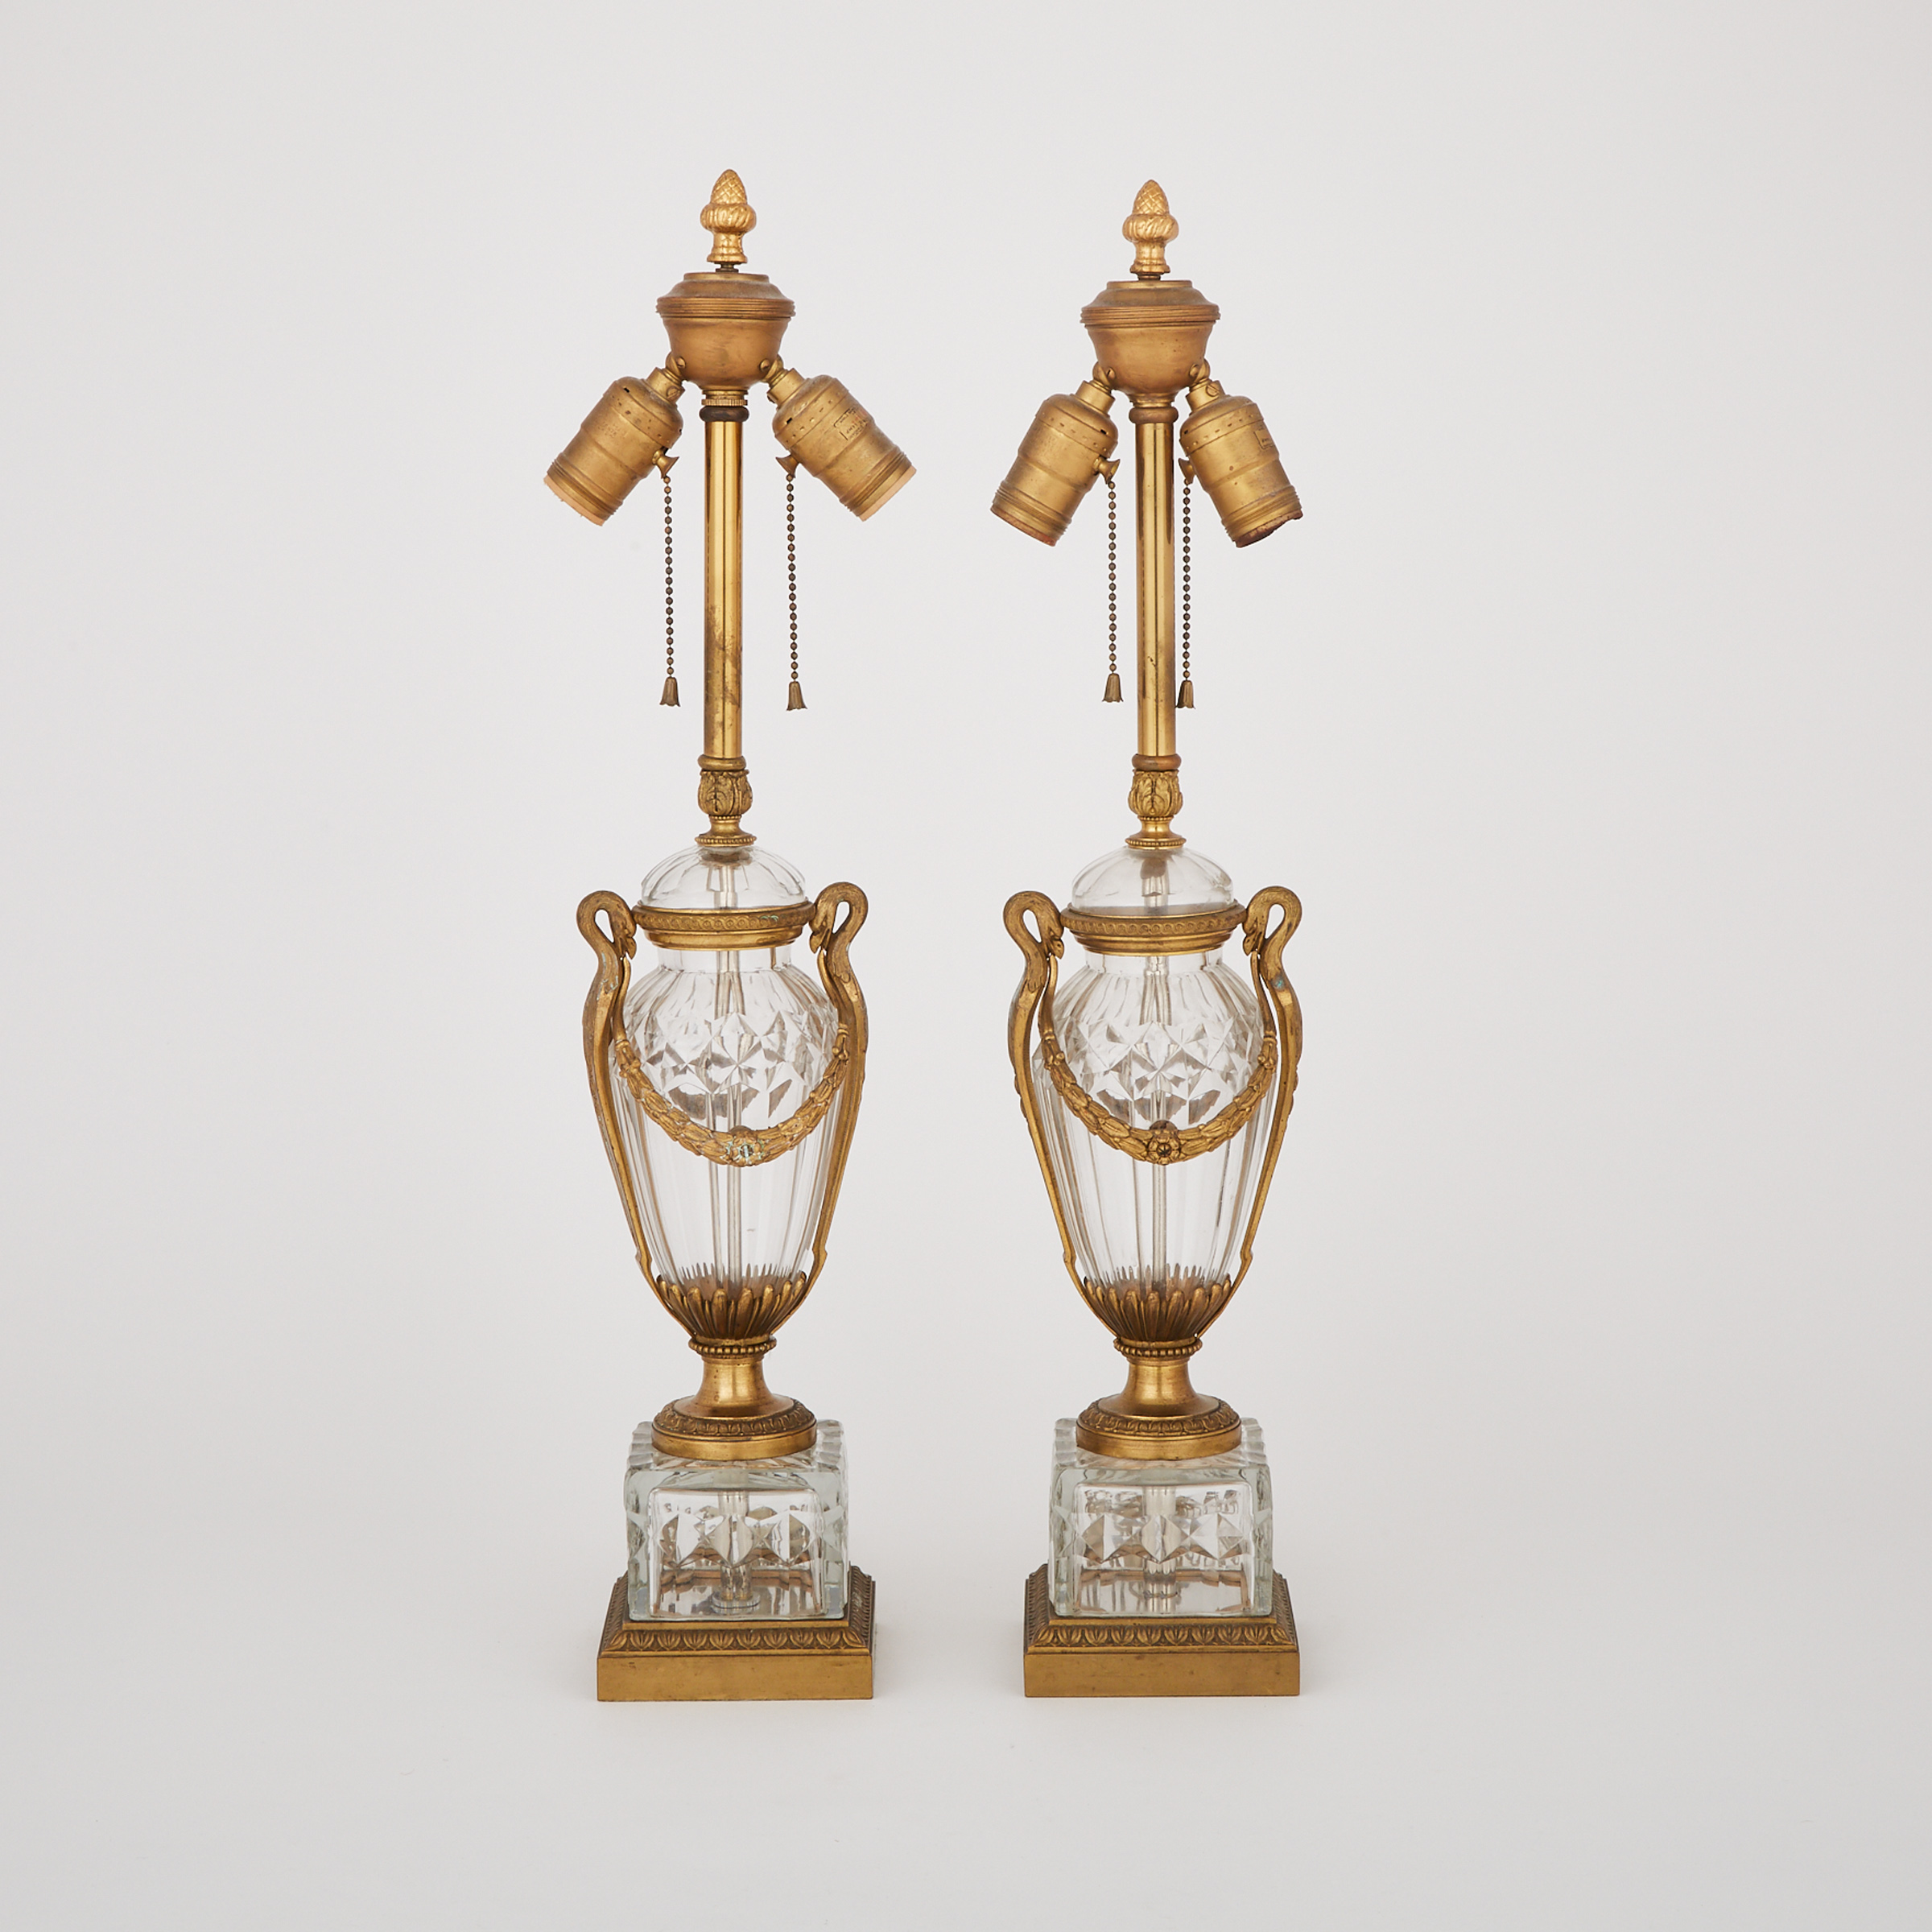 Pair of Ormolu Mounted Cut Glass Urn Form Table Lamps, mid-20th century